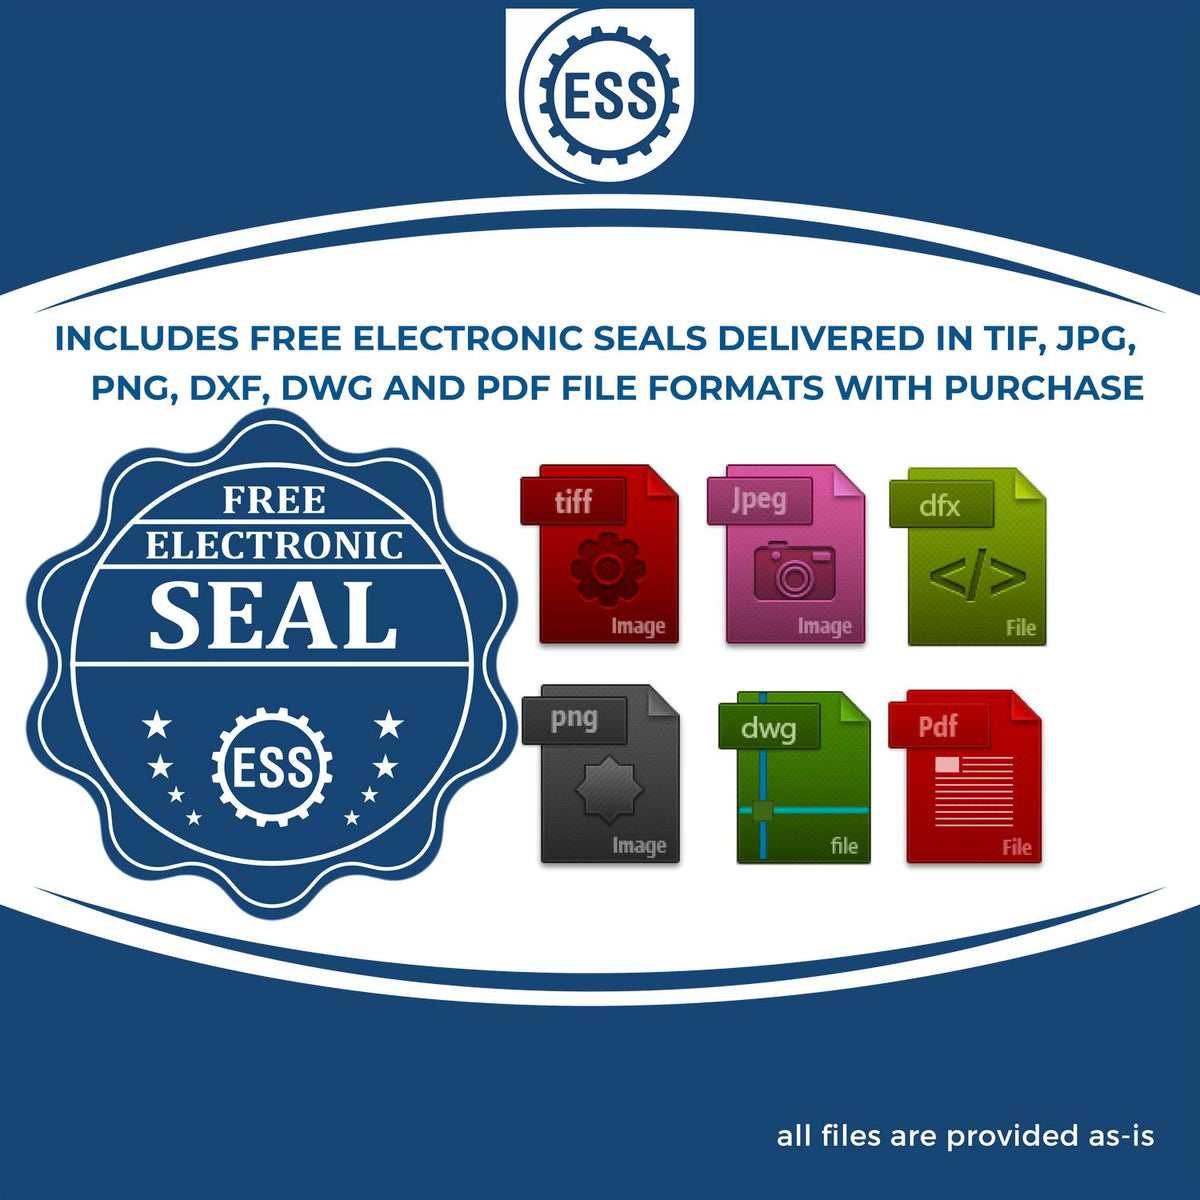 An infographic for the free electronic seal for the PSI Washington Notary Stamp illustrating the different file type icons such as DXF, DWG, TIF, JPG and PNG.